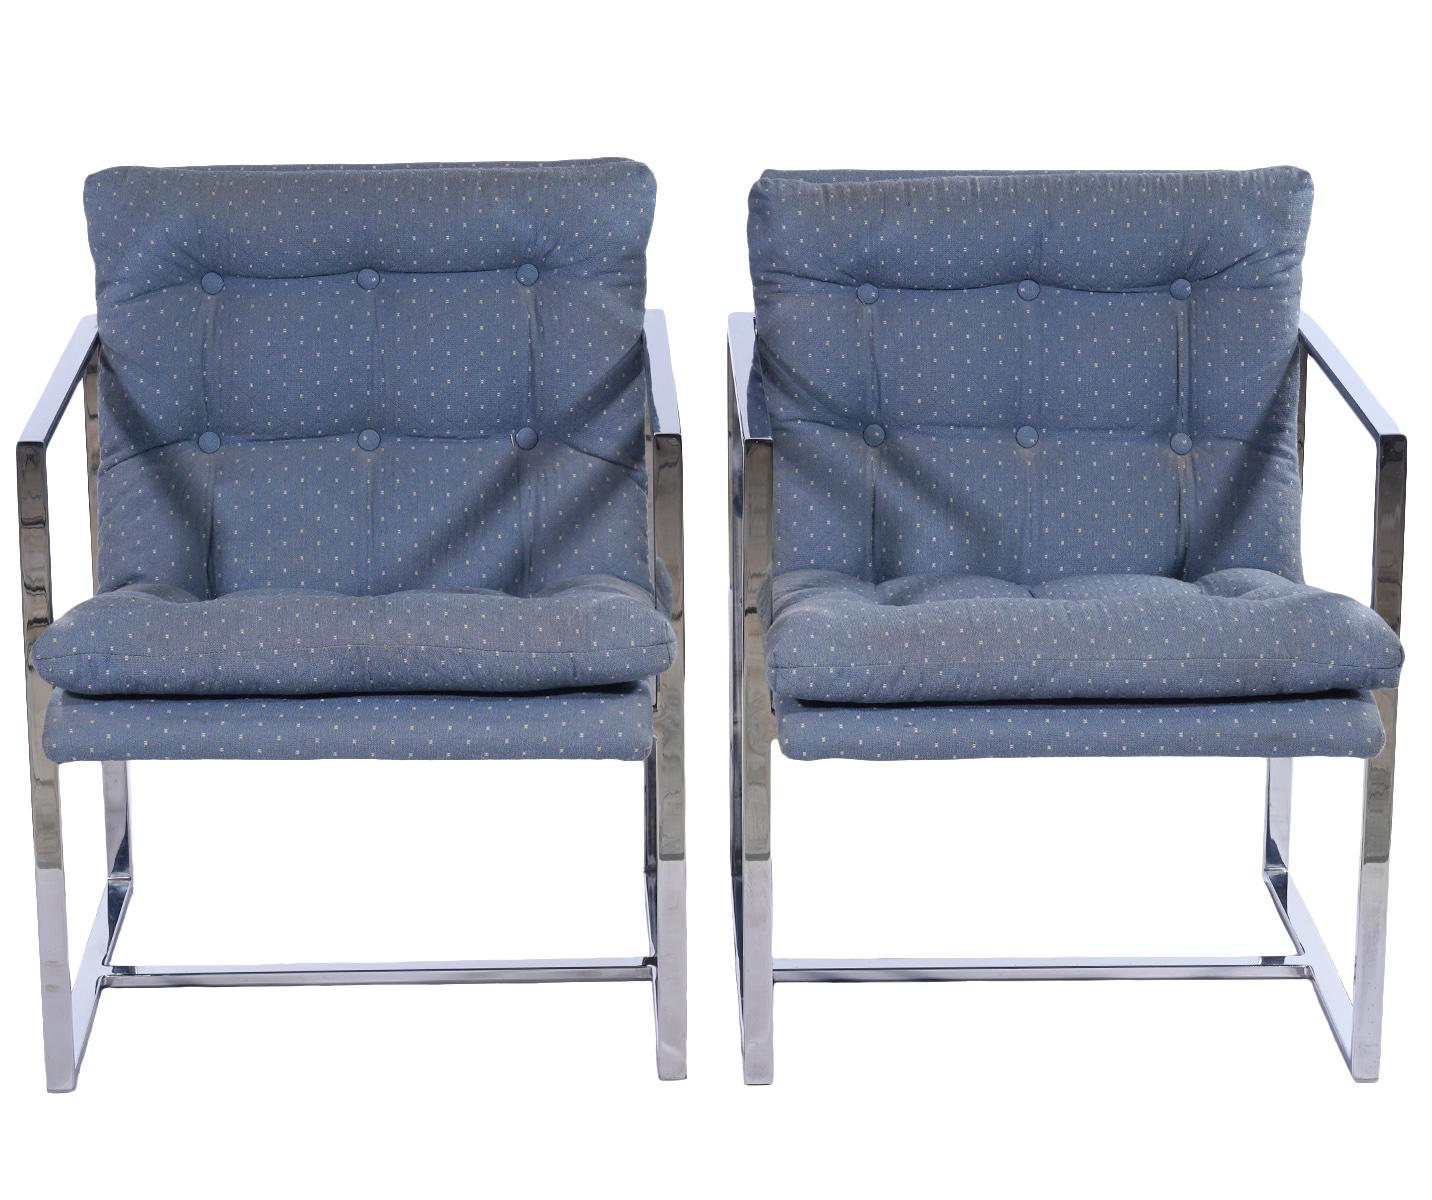 Pair of Milo Baughman style armchairs. Chrome frame with upholstered seat. Milo Baughman cube style design.